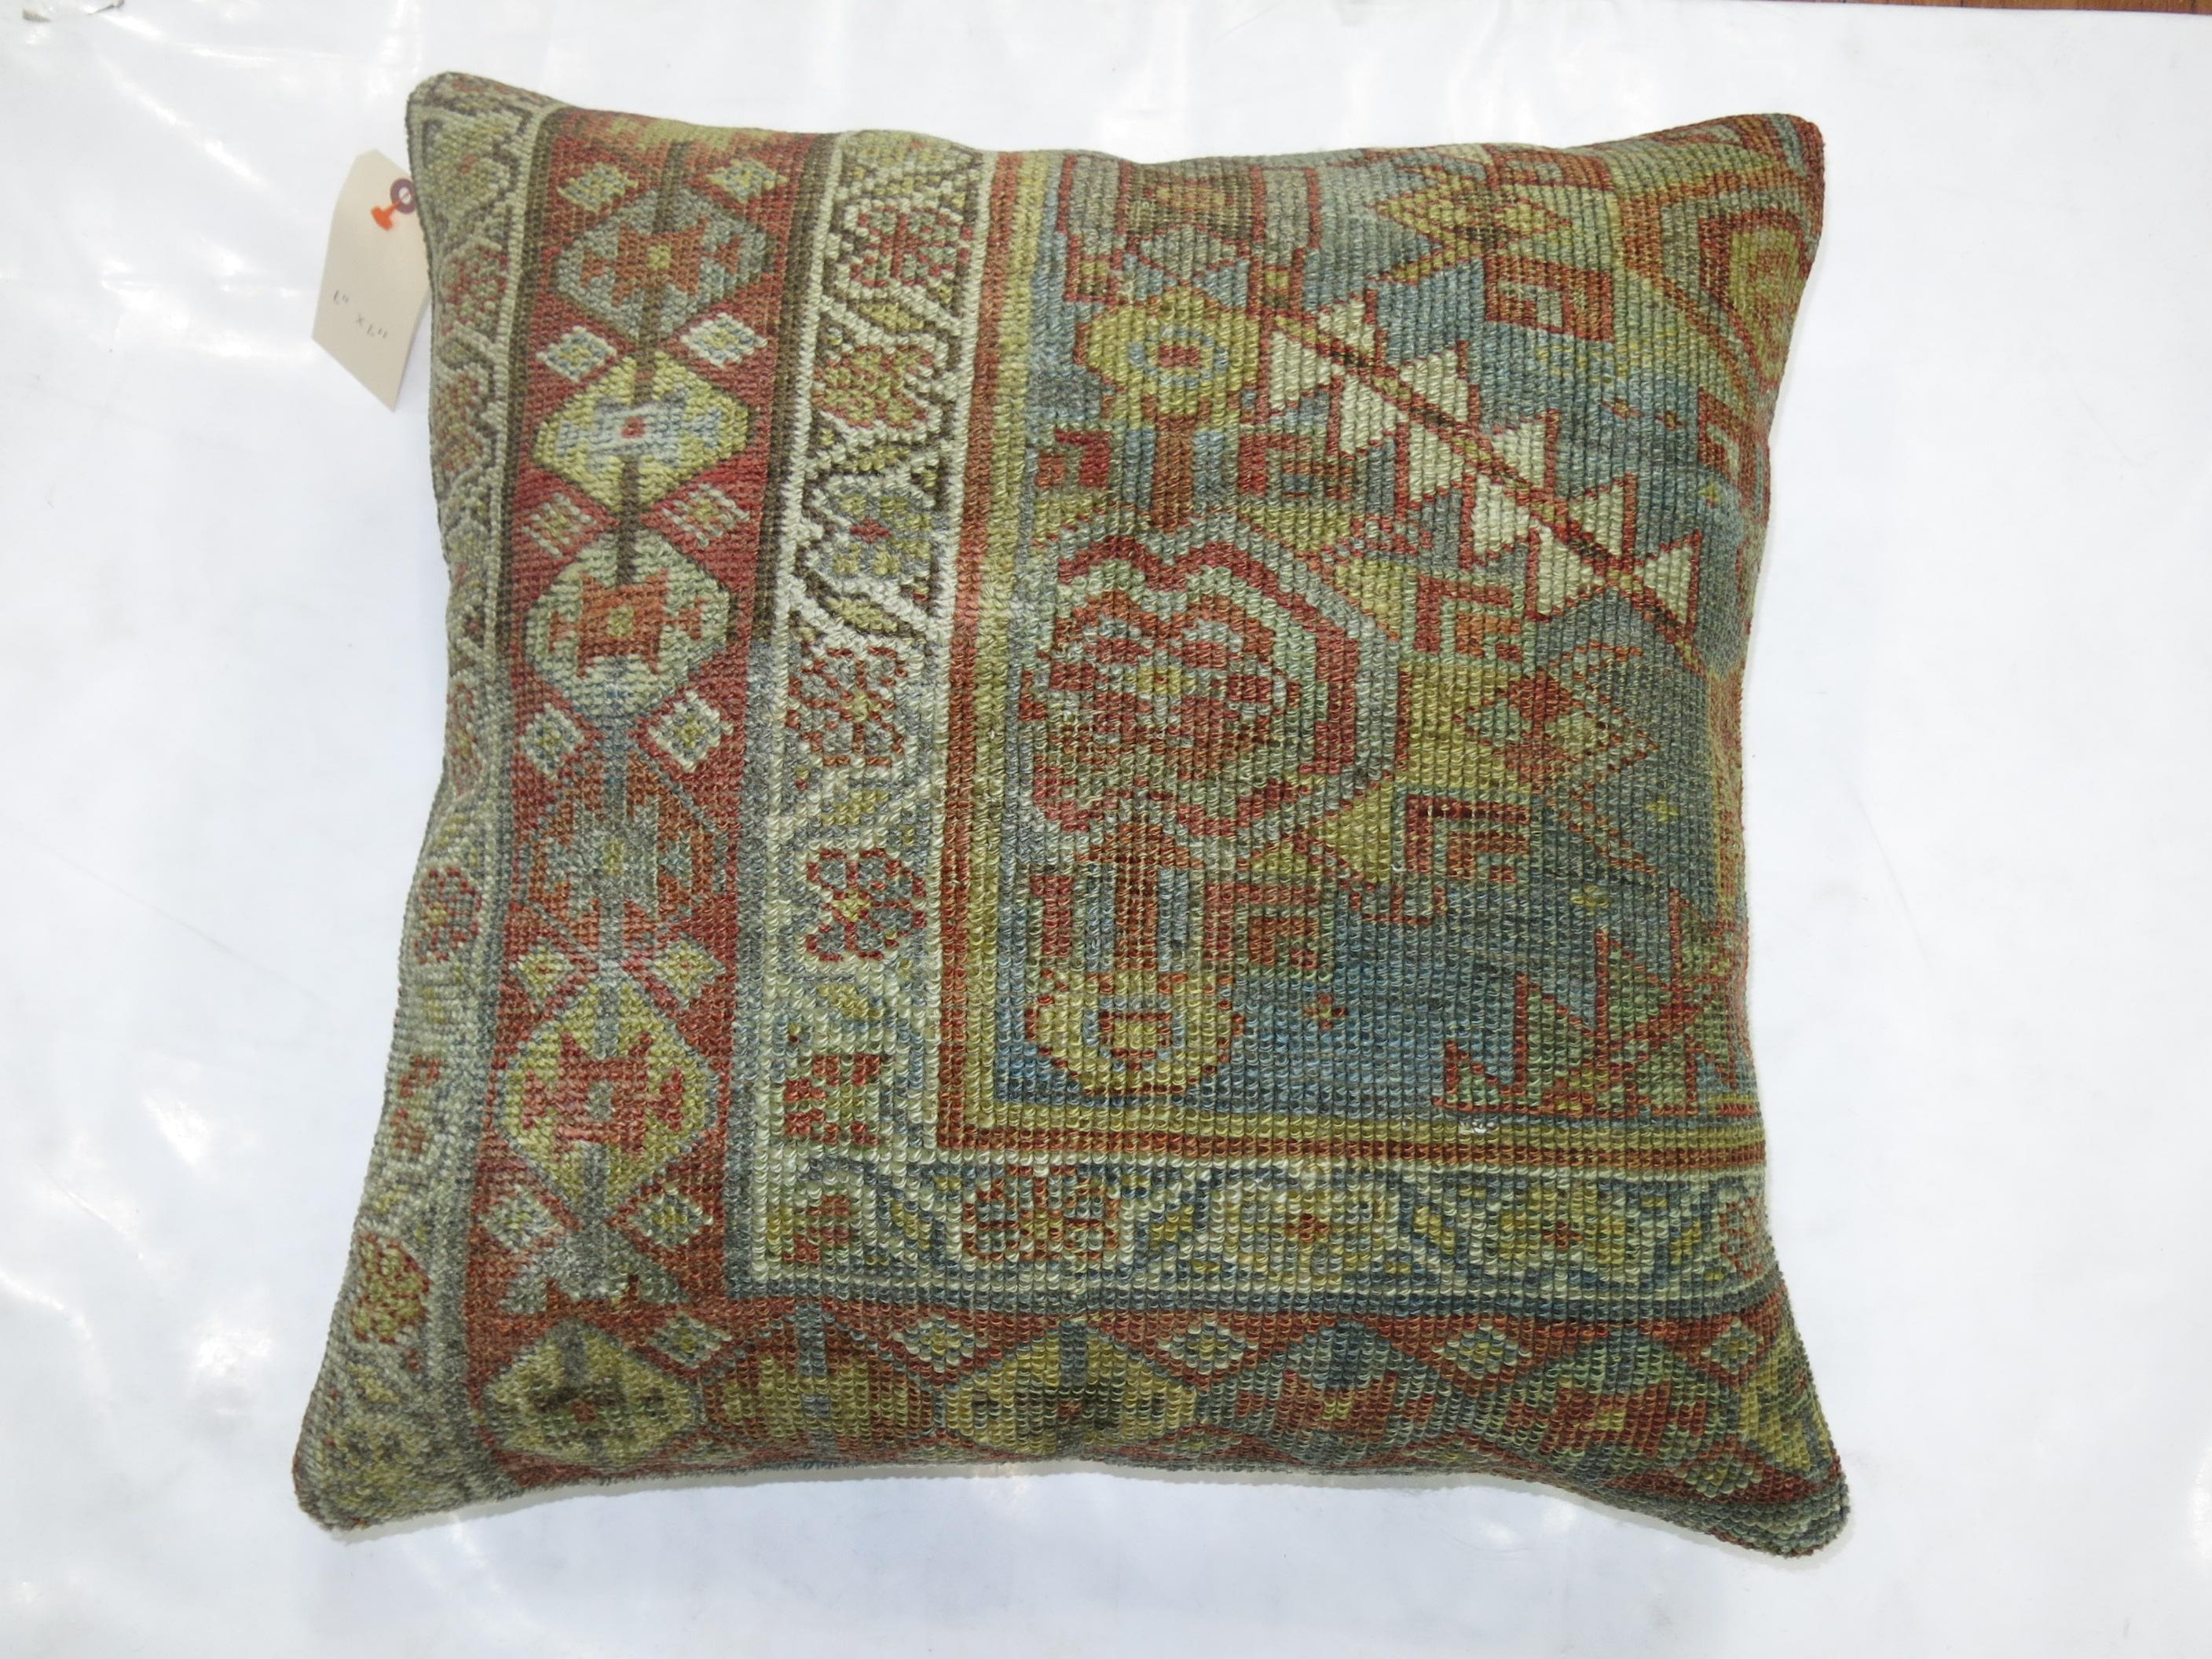 Pillow made from a Persian Malayer rug light blue and rust accents.

Measures: 23